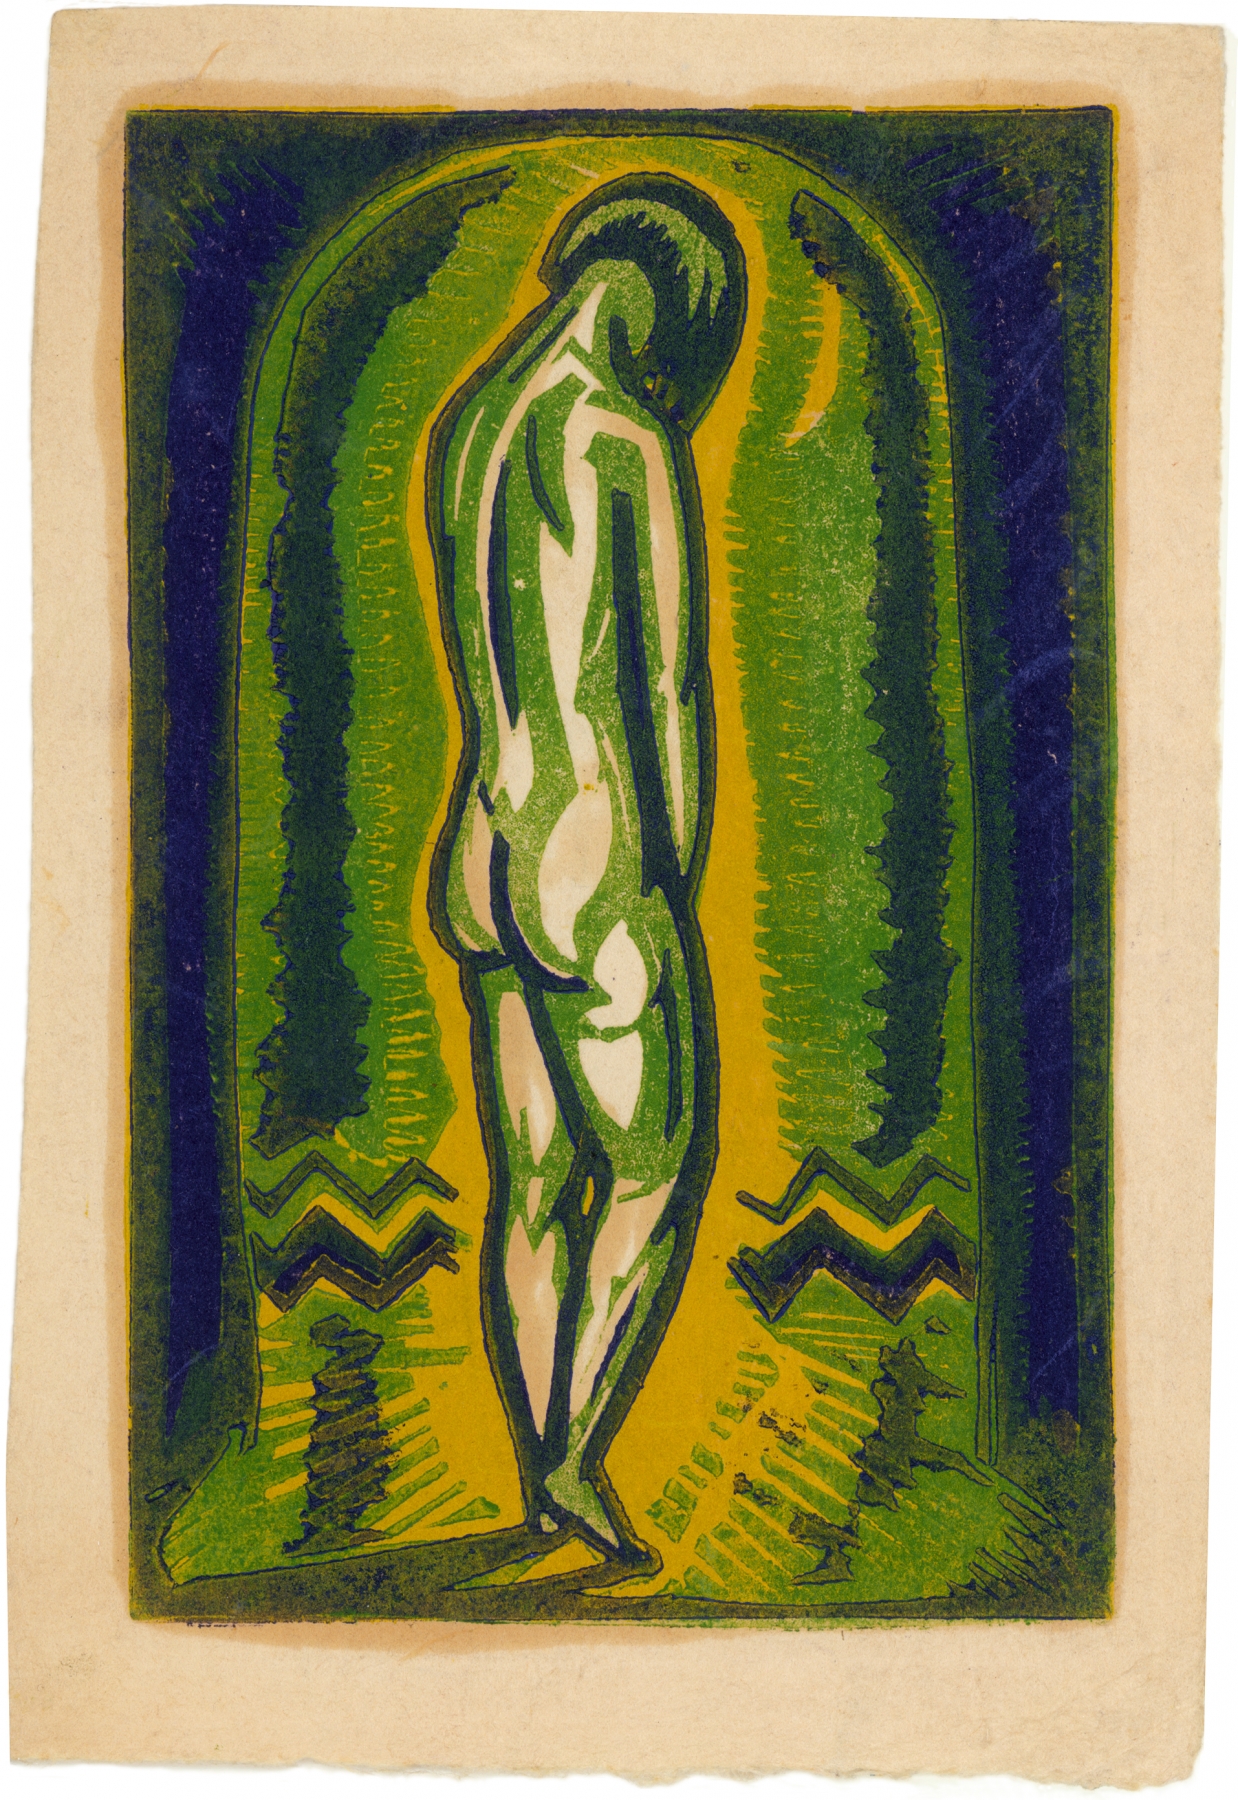 Untitled, WdCI 02601, c. late 1920s
Linocut
H: 9 1/16 x W: 6 1/4 inches